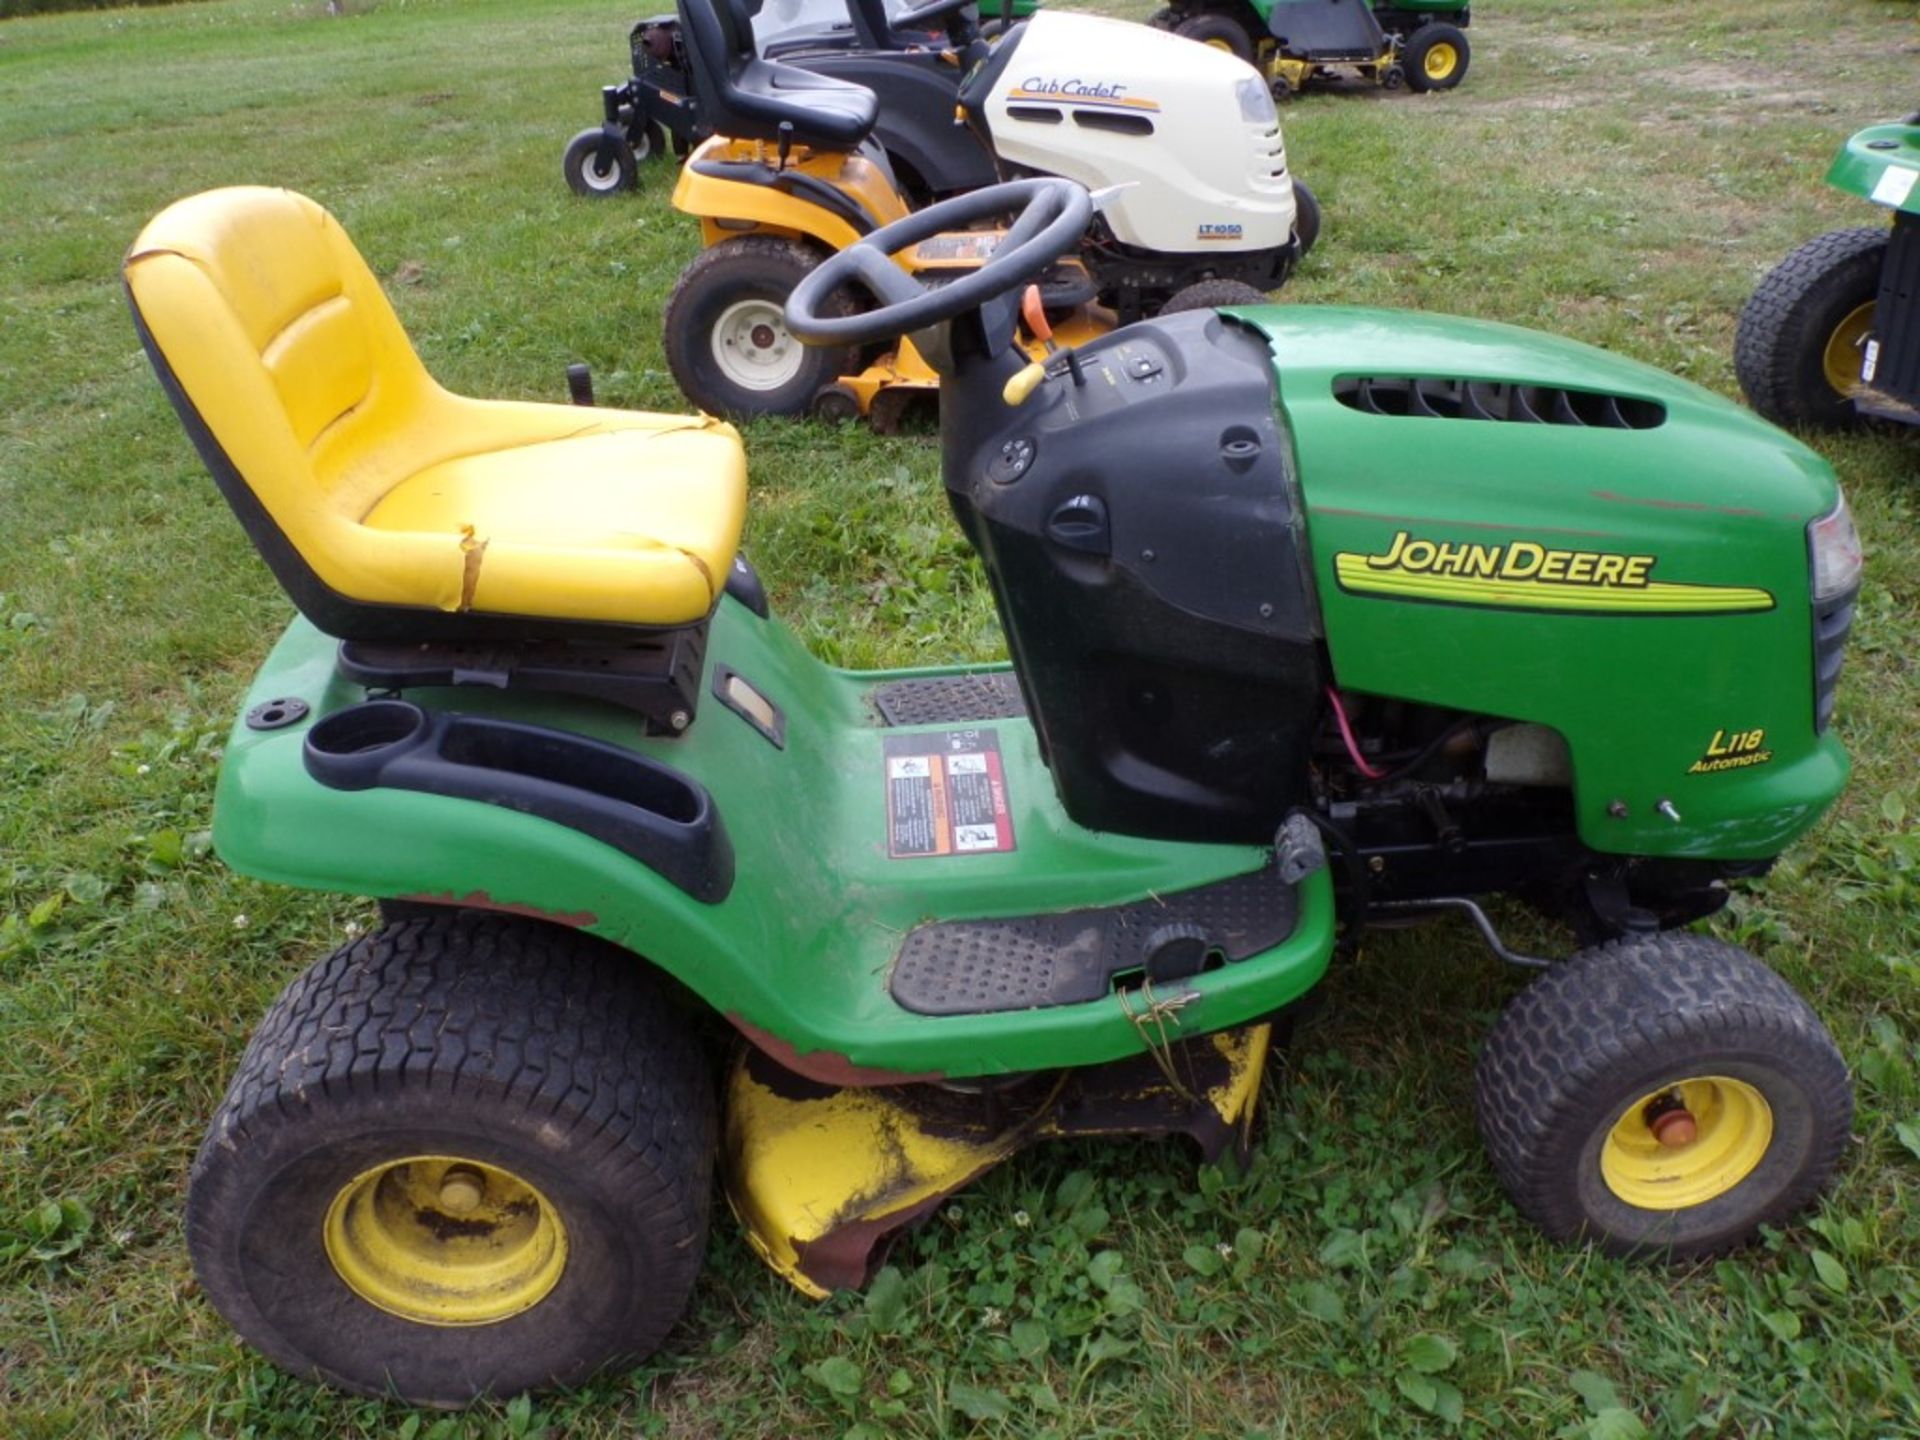 John Deere L118 Automatic Riding Mower w/38'' Deck, 22 HP Briggs & Stratton Engine, Seat Is Ripper - Image 2 of 2